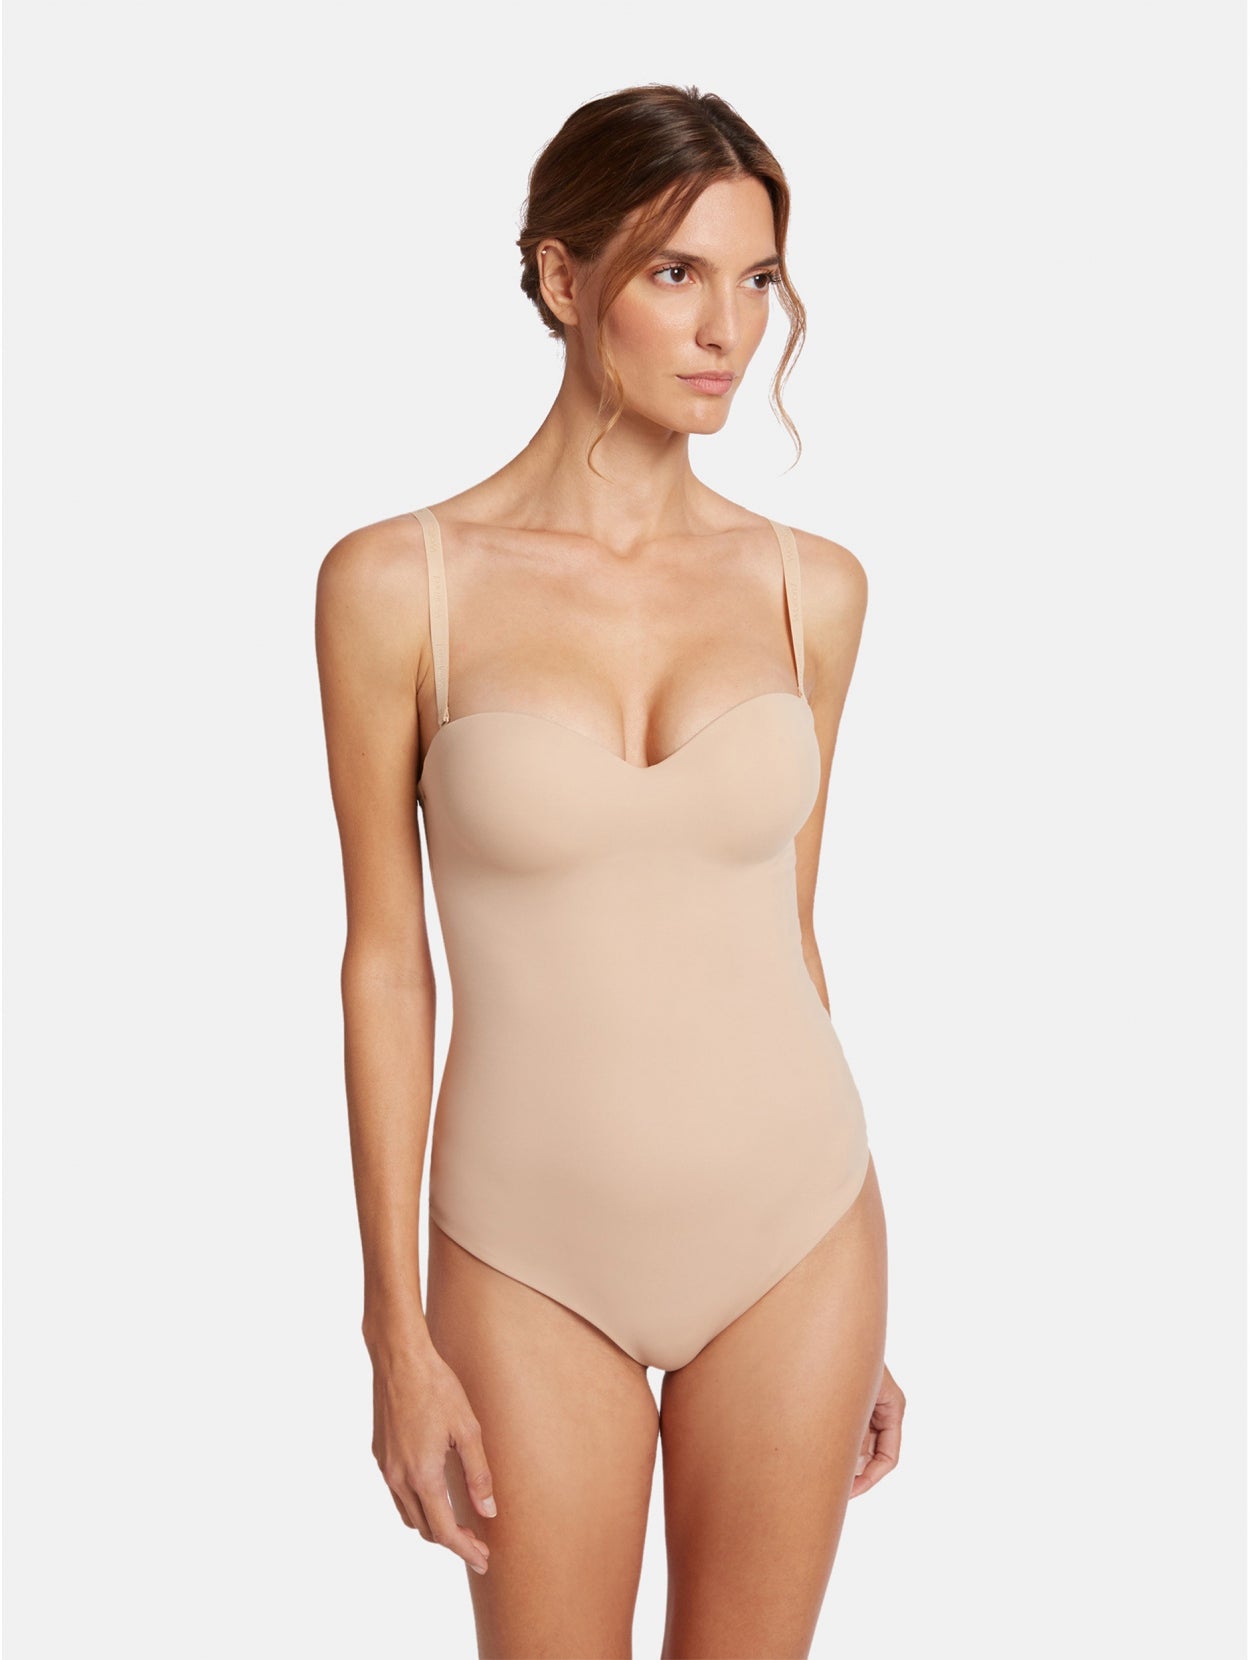 Wolford Mat De Luxe Forming Body Suit in Beige 45829 Size XS (B Cup)